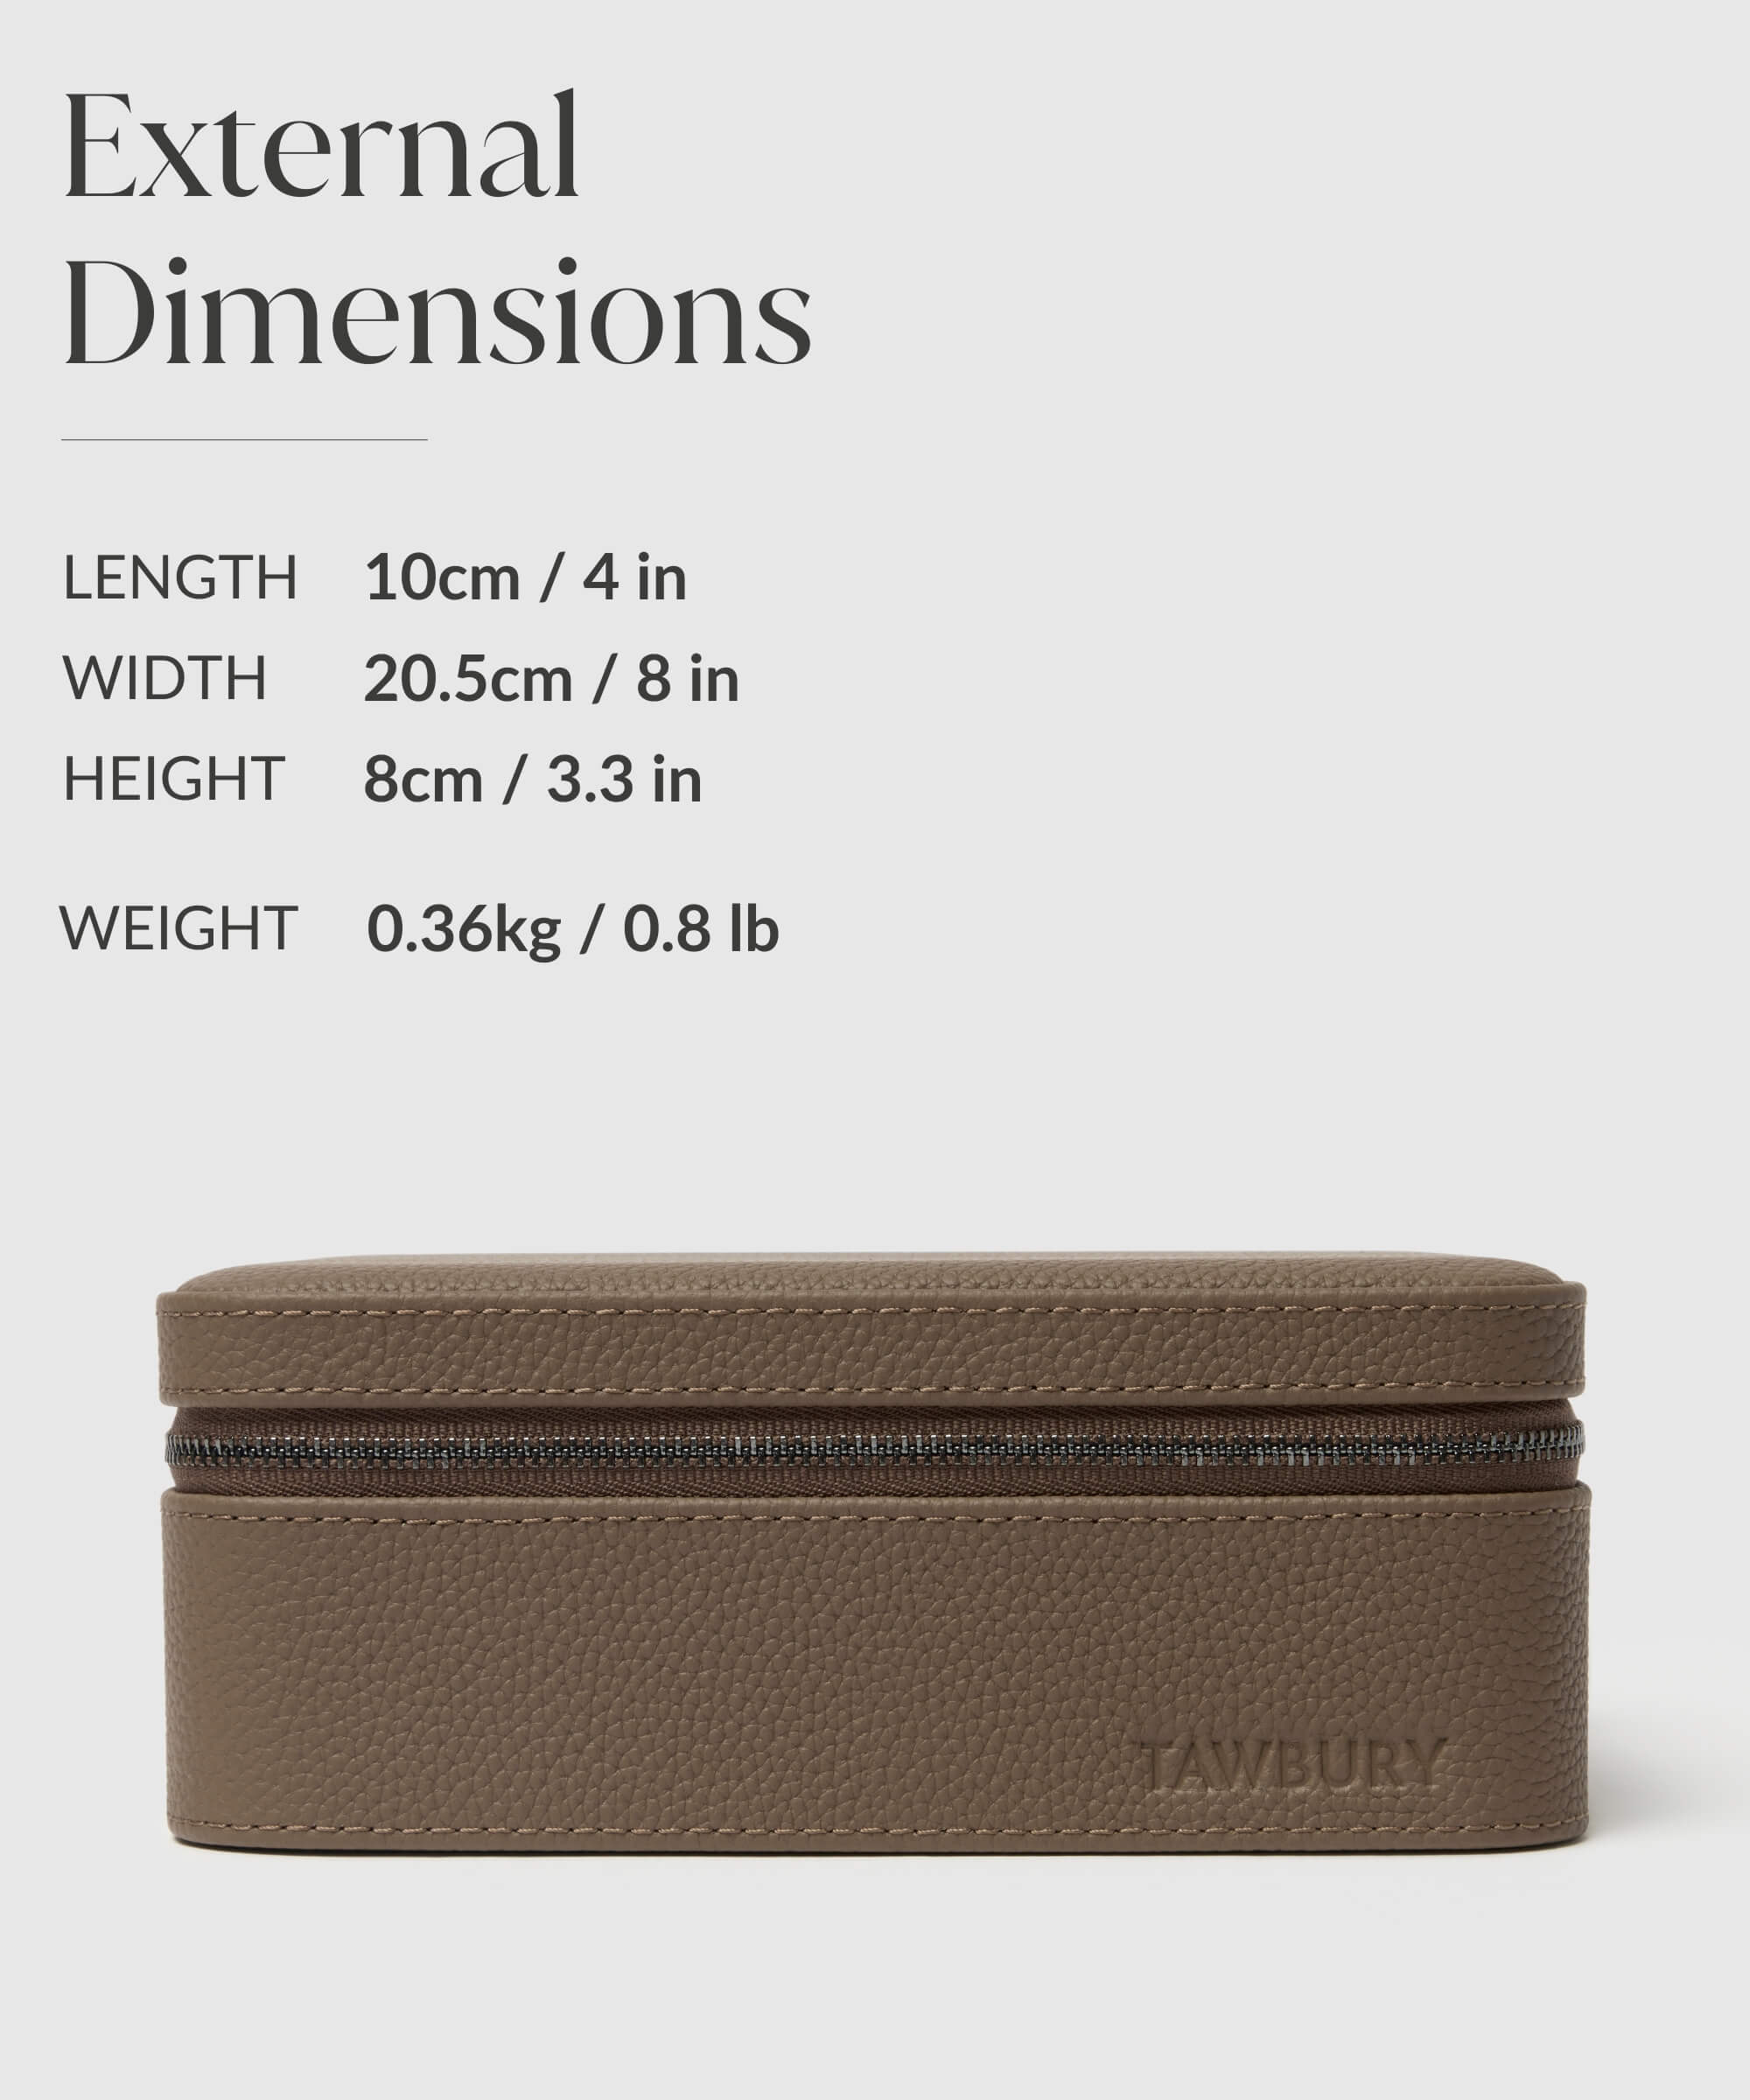 The compact design of a TAWBURY Fraser 3 Watch Travel Case - Taupe provides protection for watches during travel.